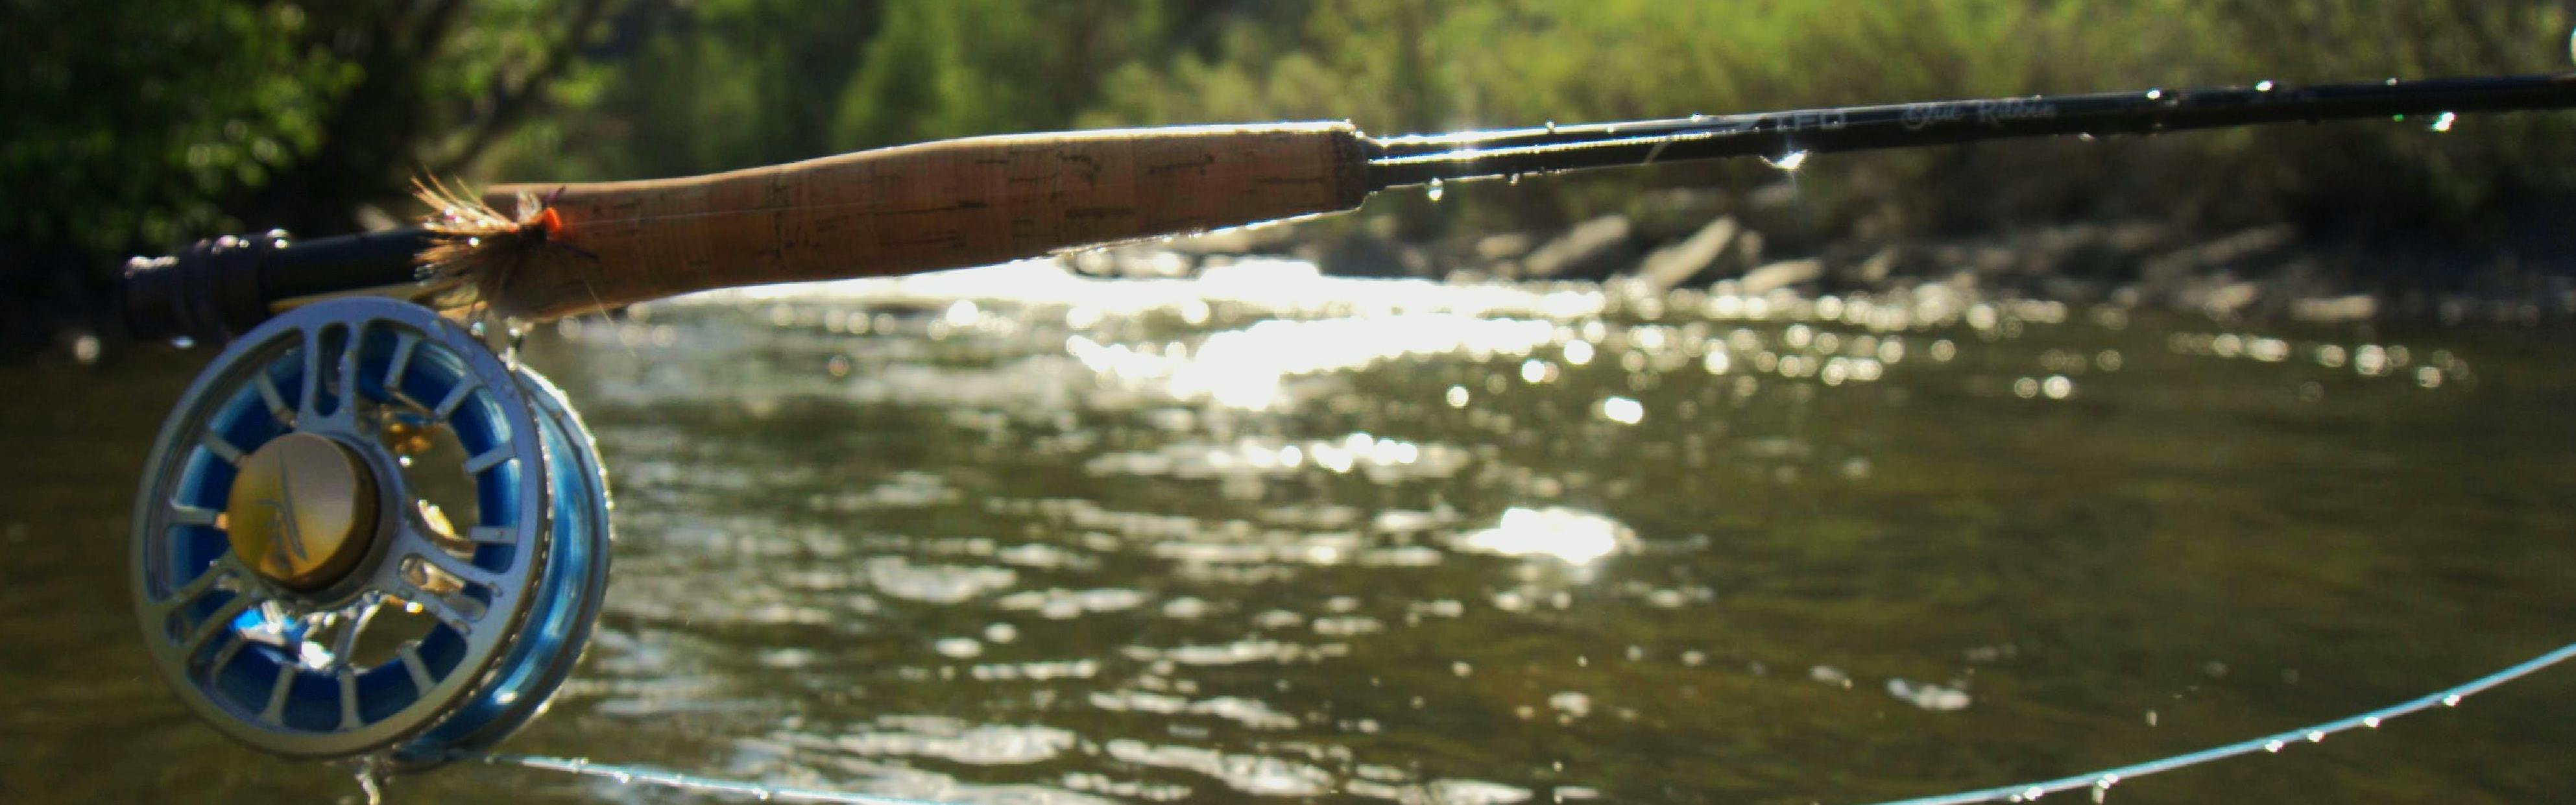 The Temple Fork Outfitters Blue Ribbon Fly Rod.